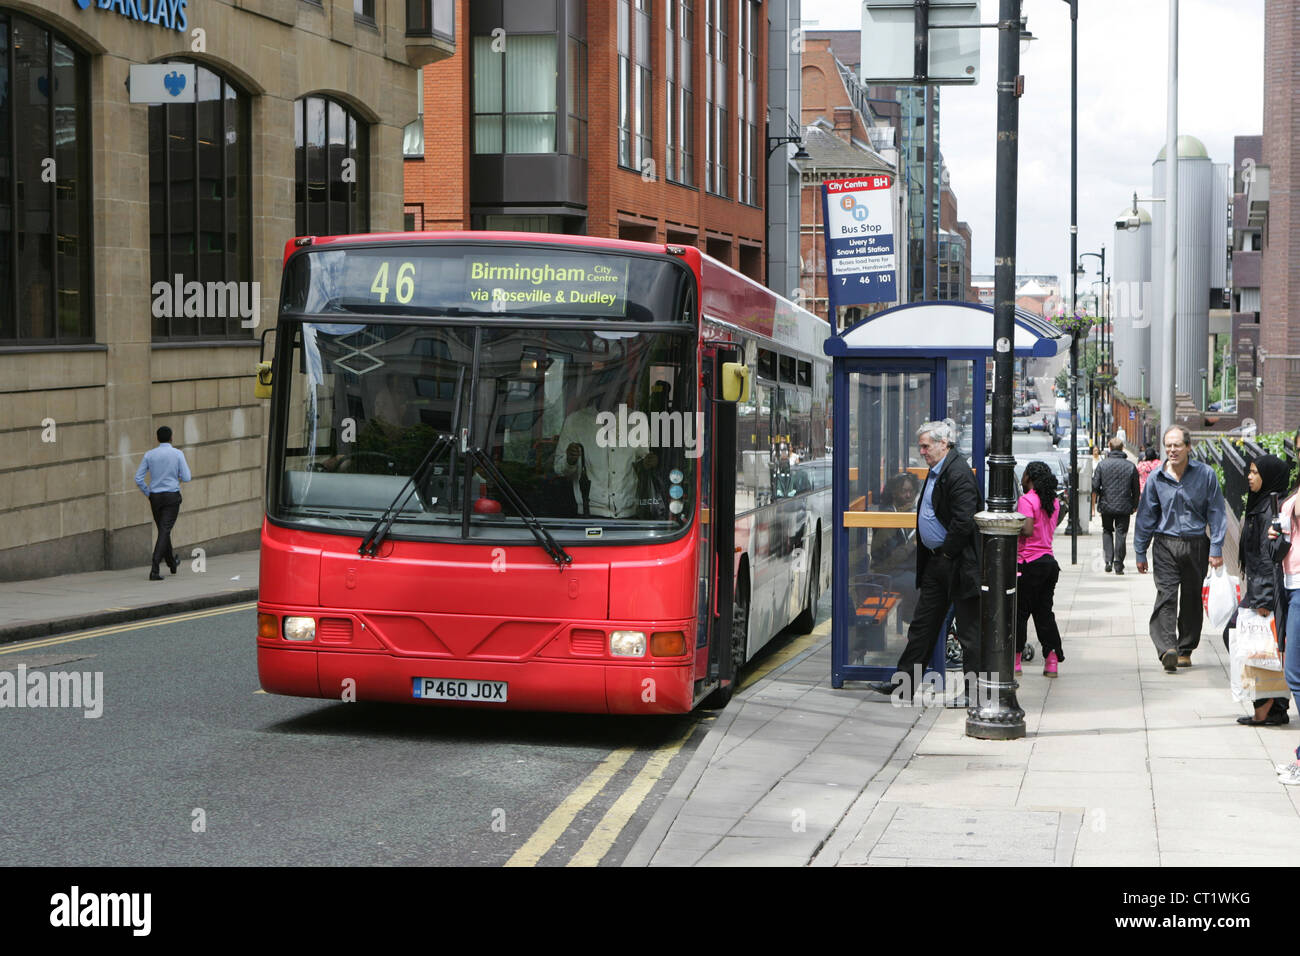 travel west midlands bus stops at livery street snow hill june 2012 Stock Photo